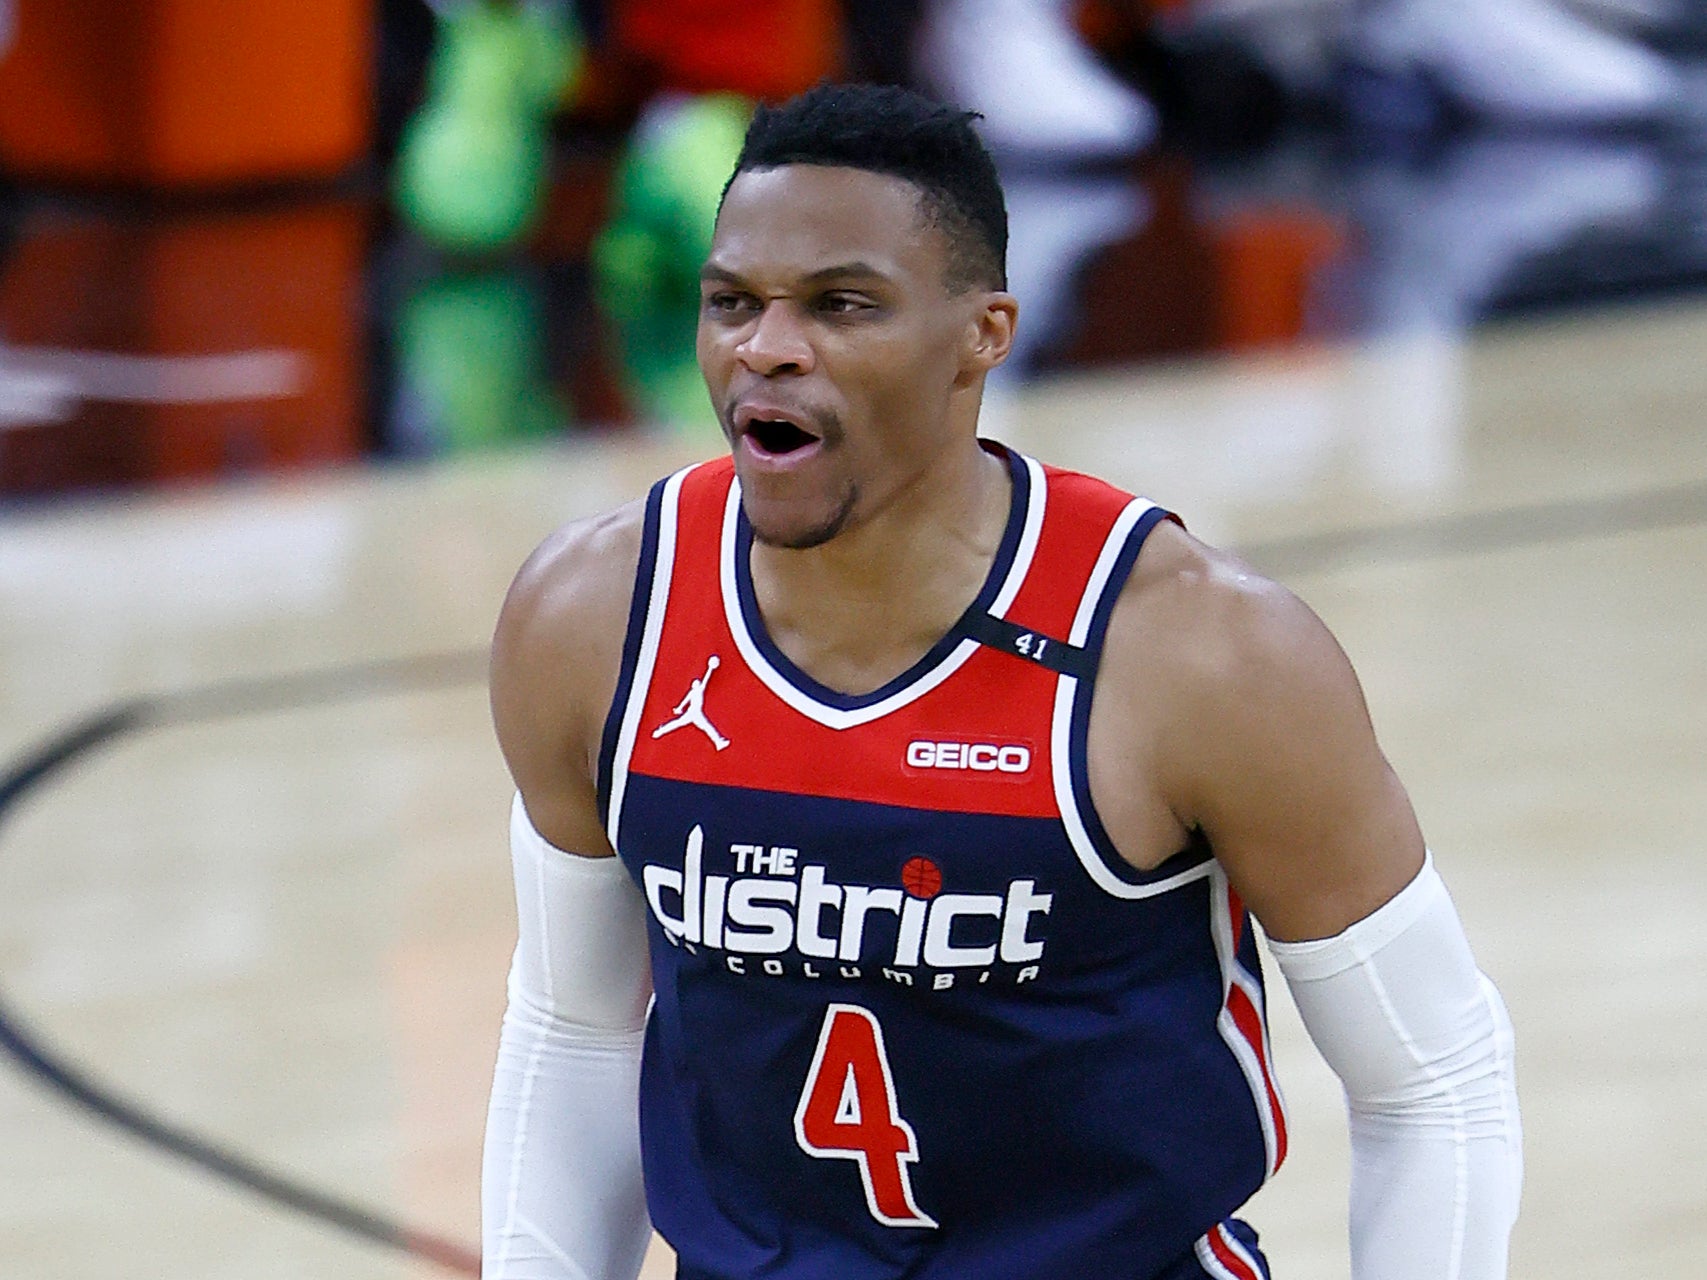 Russell Westbrook led the Washington Wizards past the Indiana Pacers with a stunning triple-double